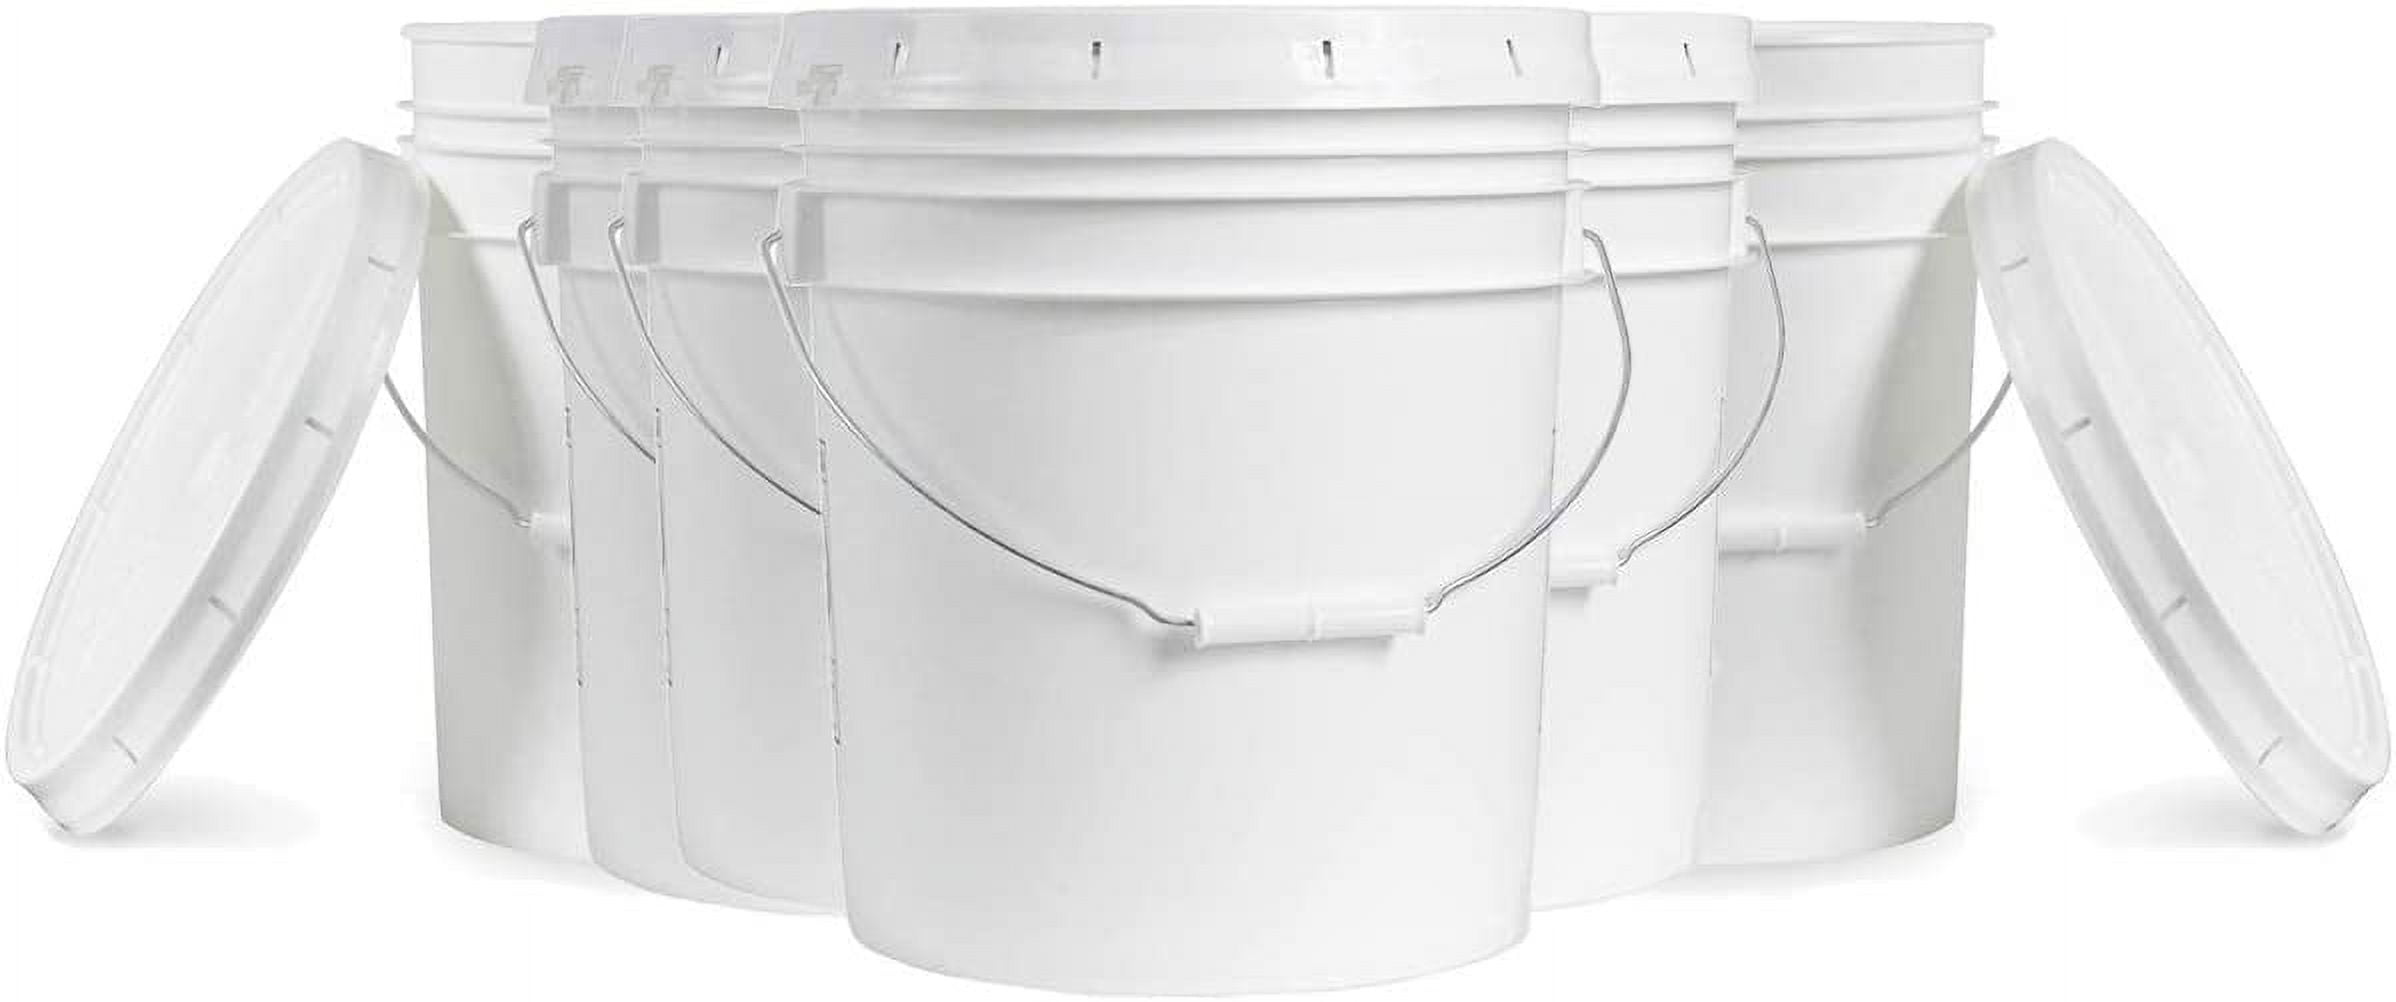 5 GALLON BUCKET WITH LID – Booyah Clean®